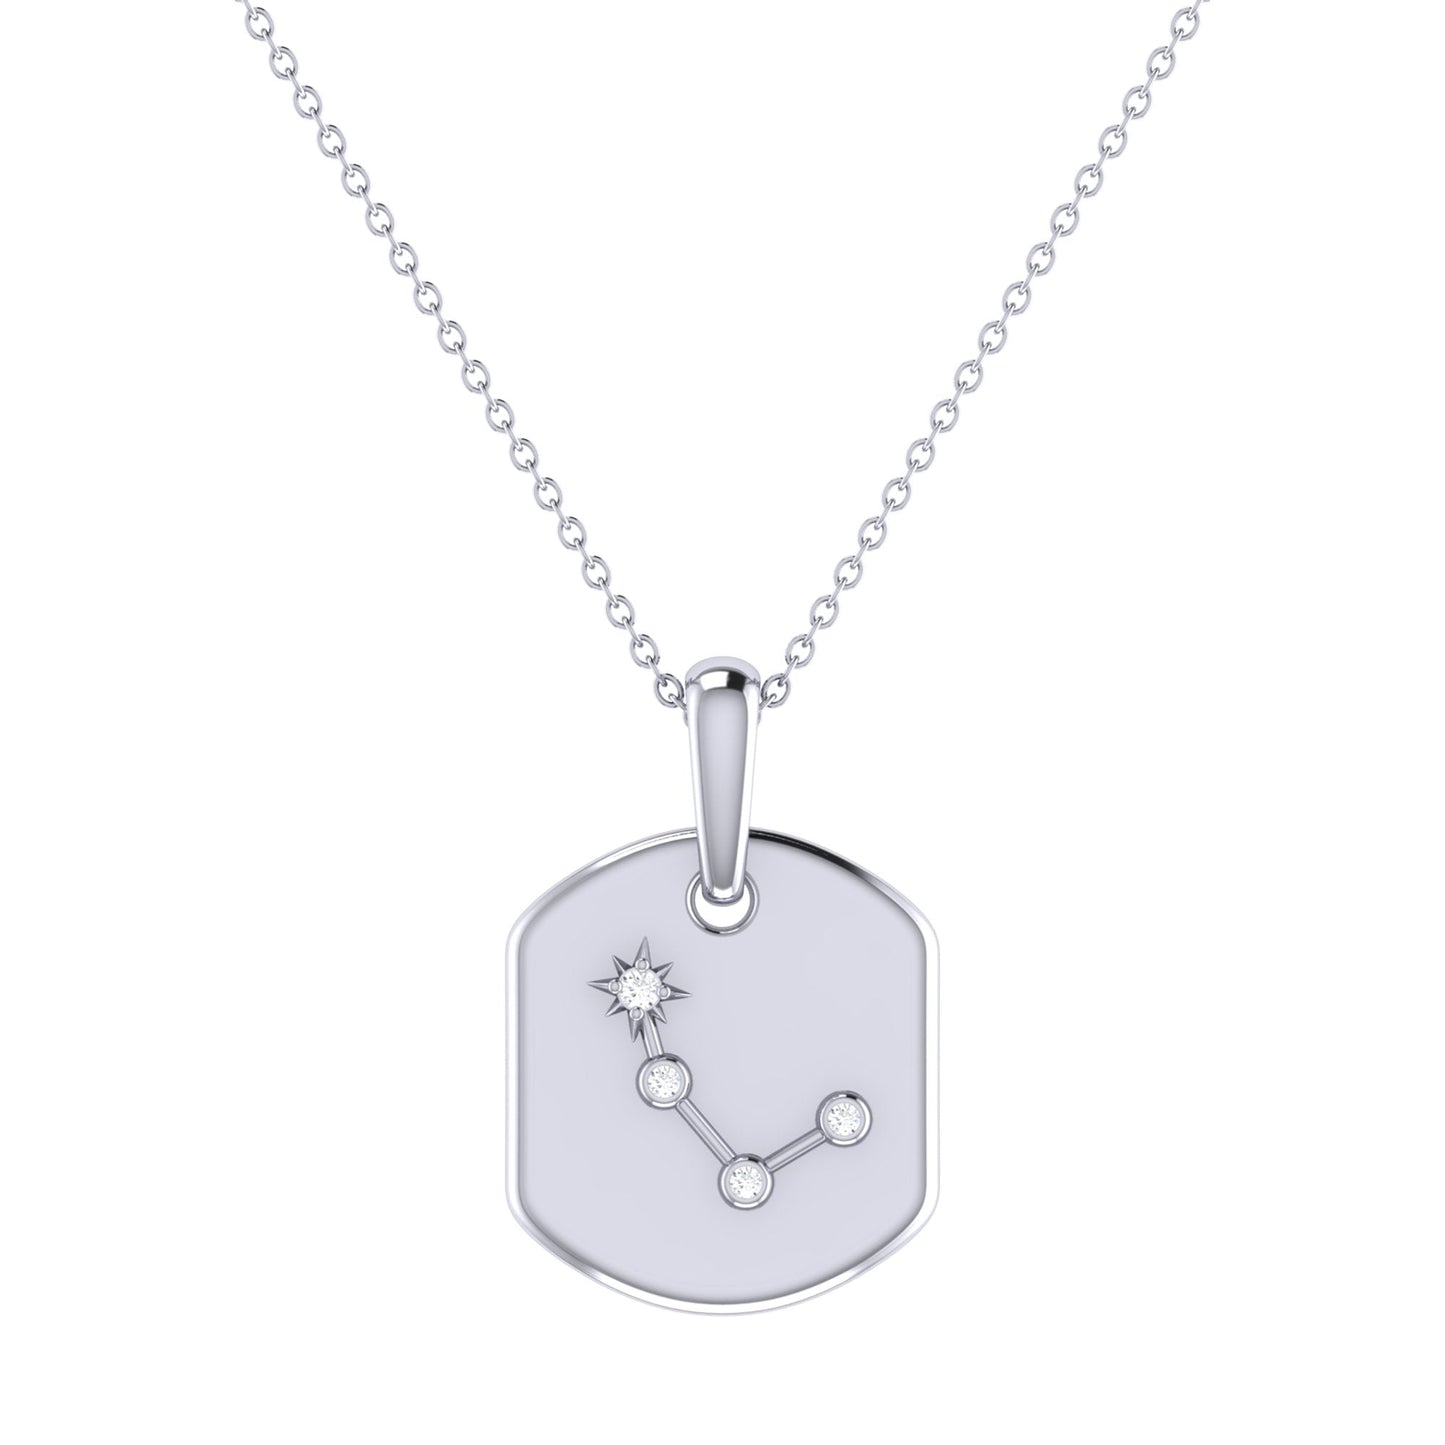 Aries Ram Diamond Constellation Tag Pendant Necklace in Sterling Silver by LuvMyJewelry